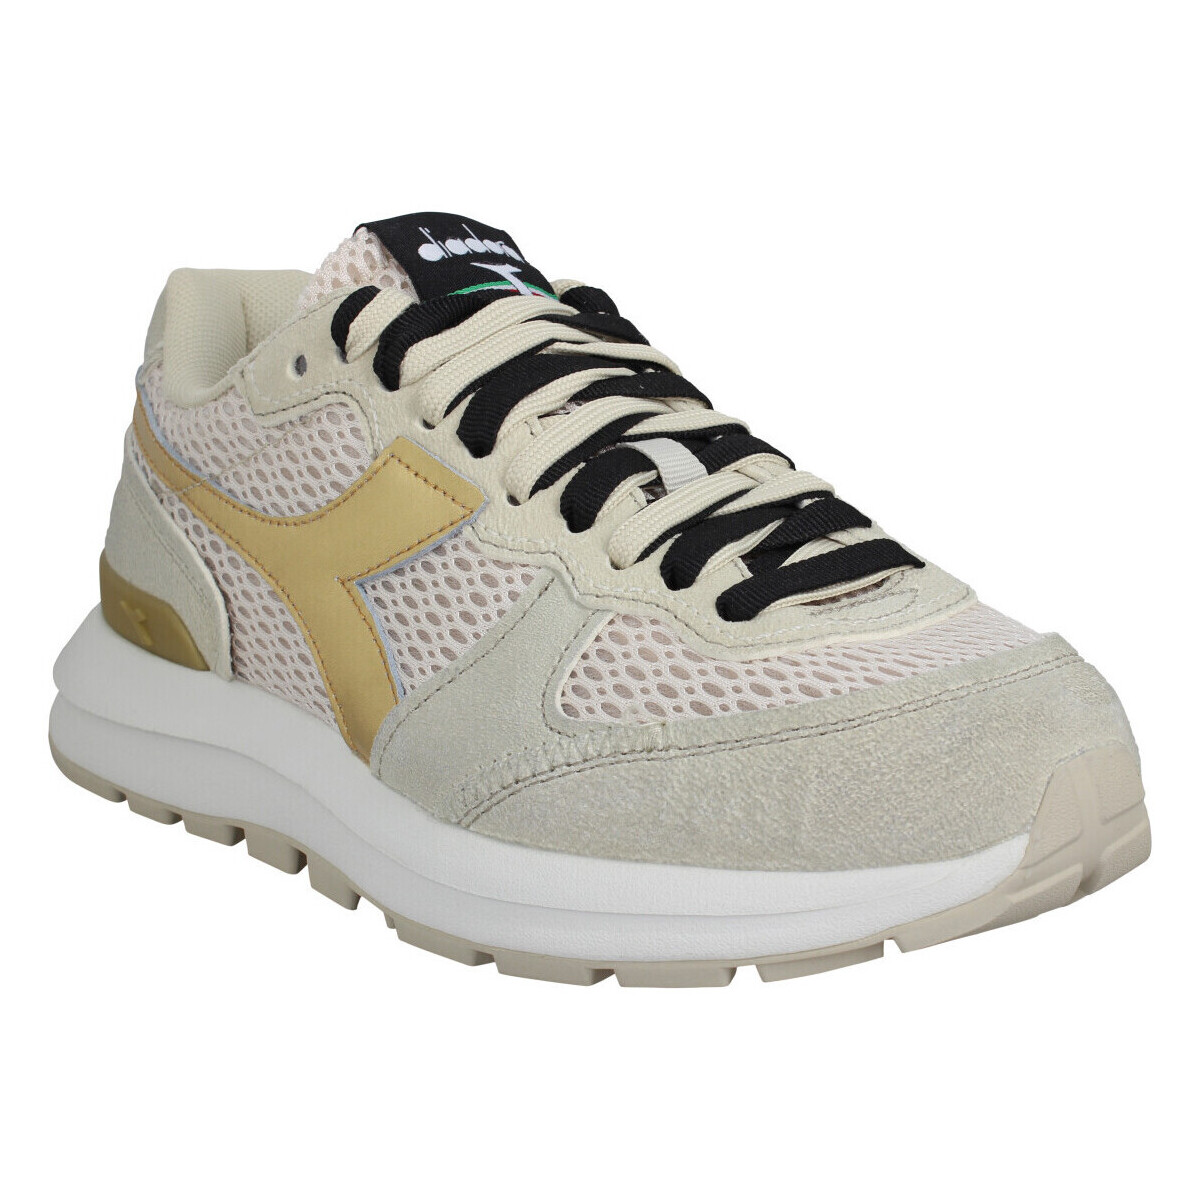 Sneakers Diadora Kmaro Cuir Toile Femme Pearl Oyster Gray